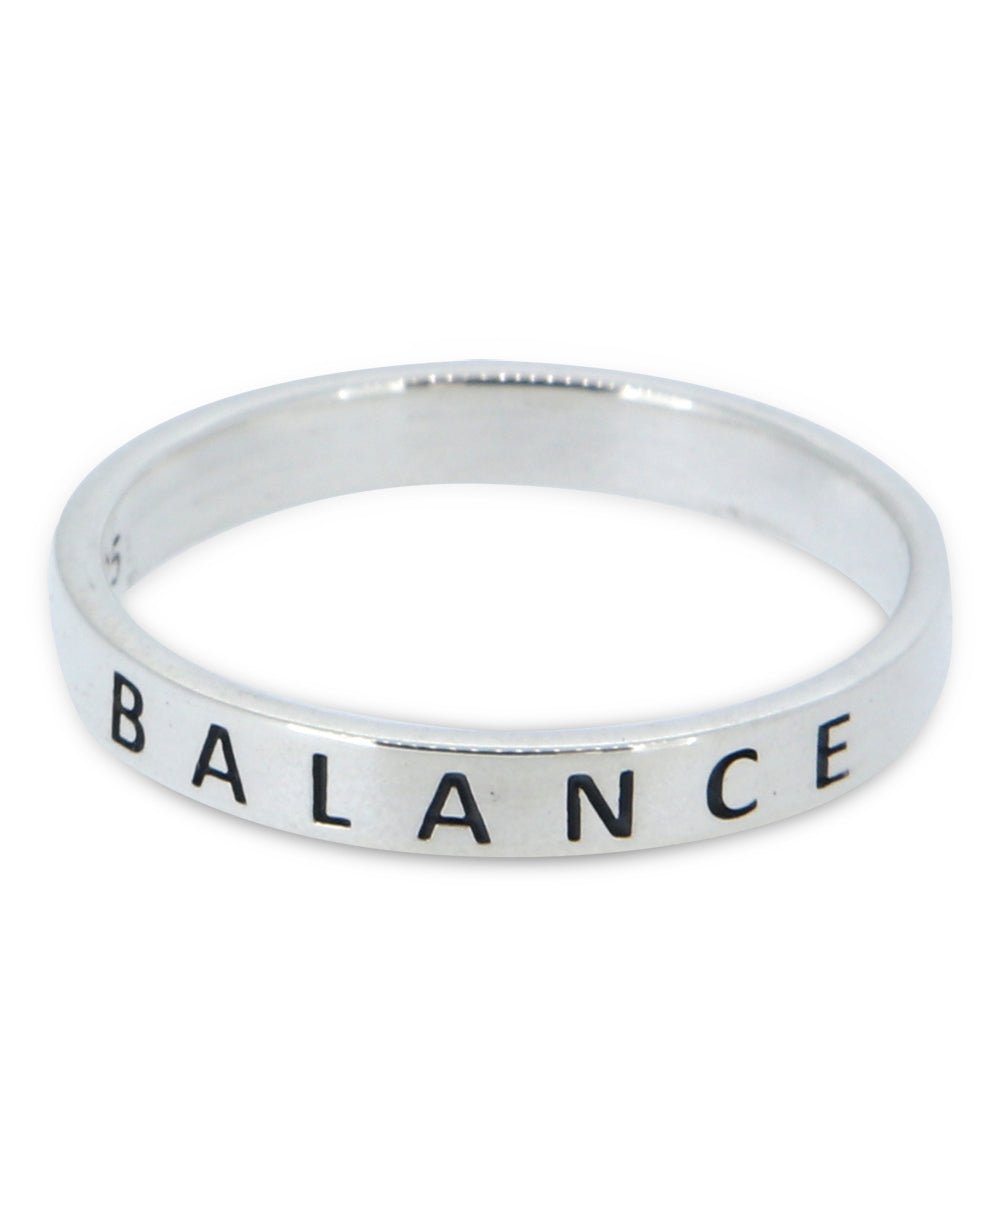 Minimalist Sterling Silver Balance Ring For Men and Women - Rings Size 6